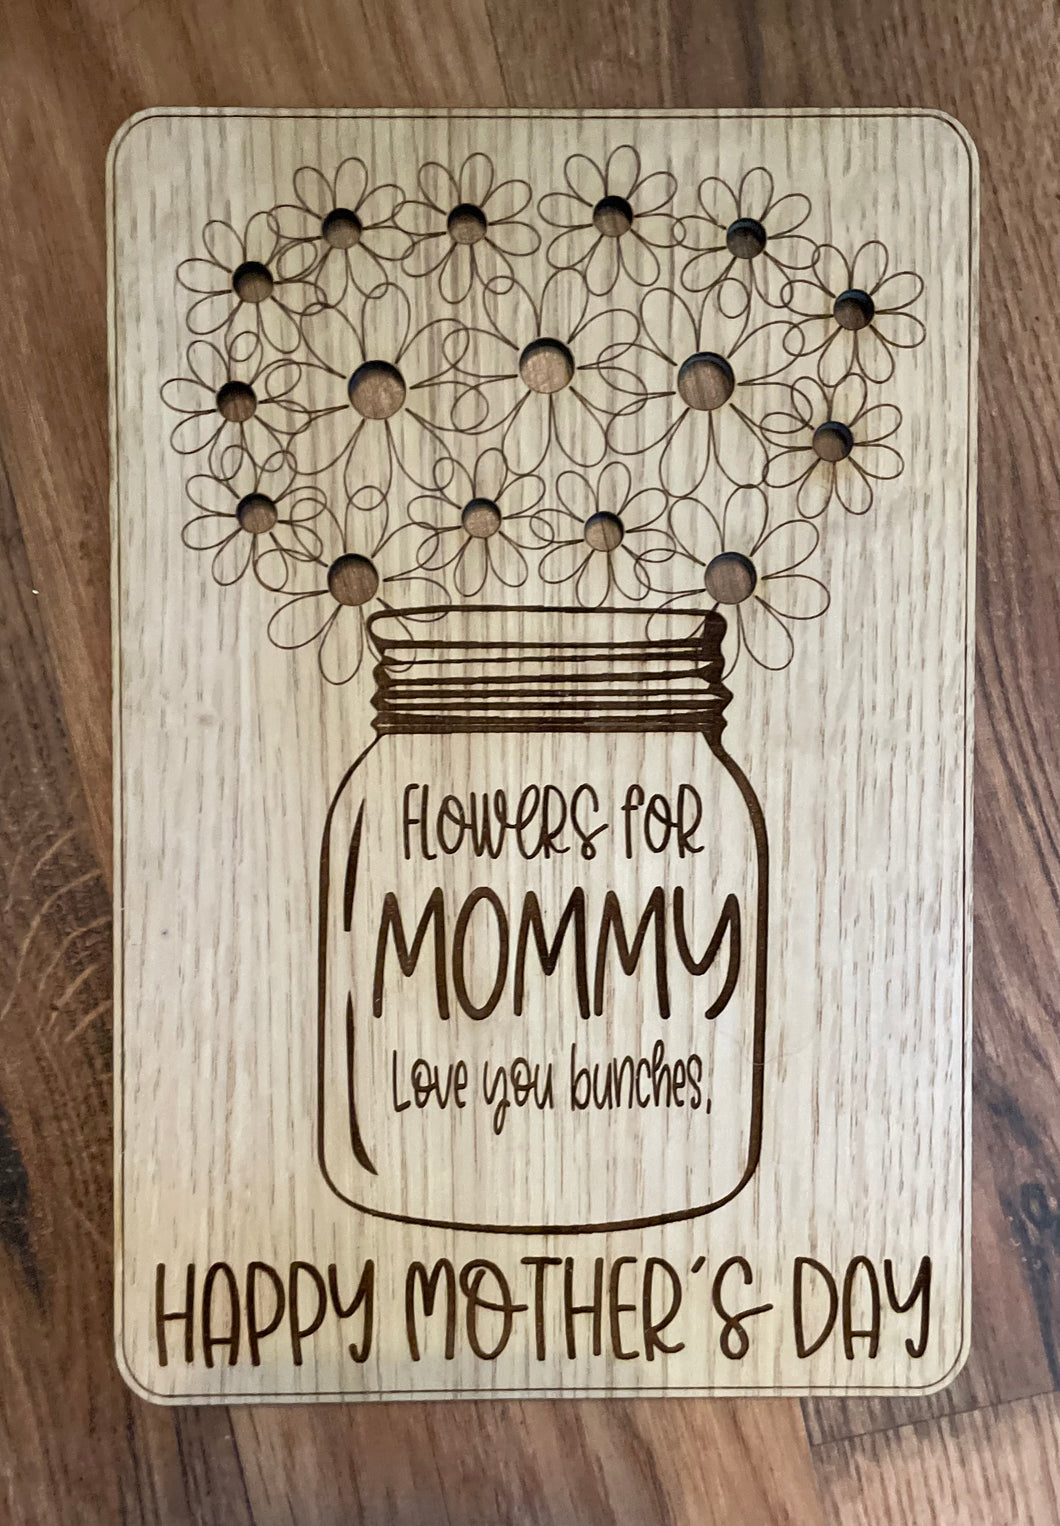 Flowers for Mommy - Happy Mother’s Day